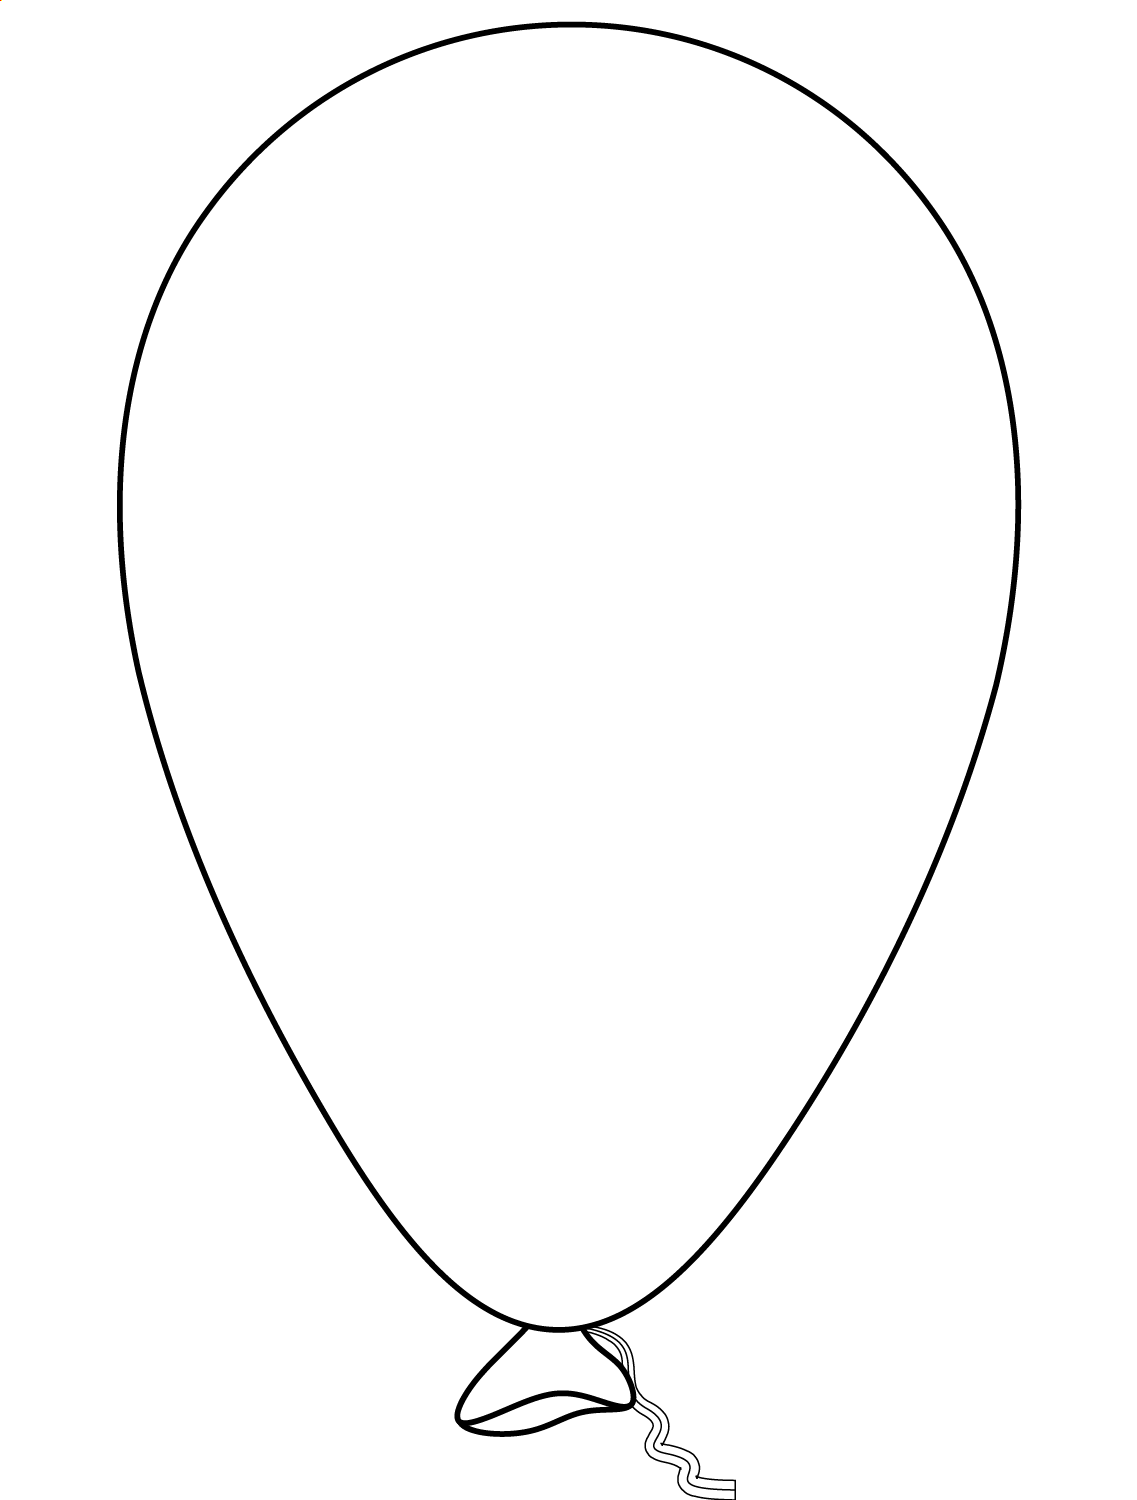 Balloon Coloring Page For You